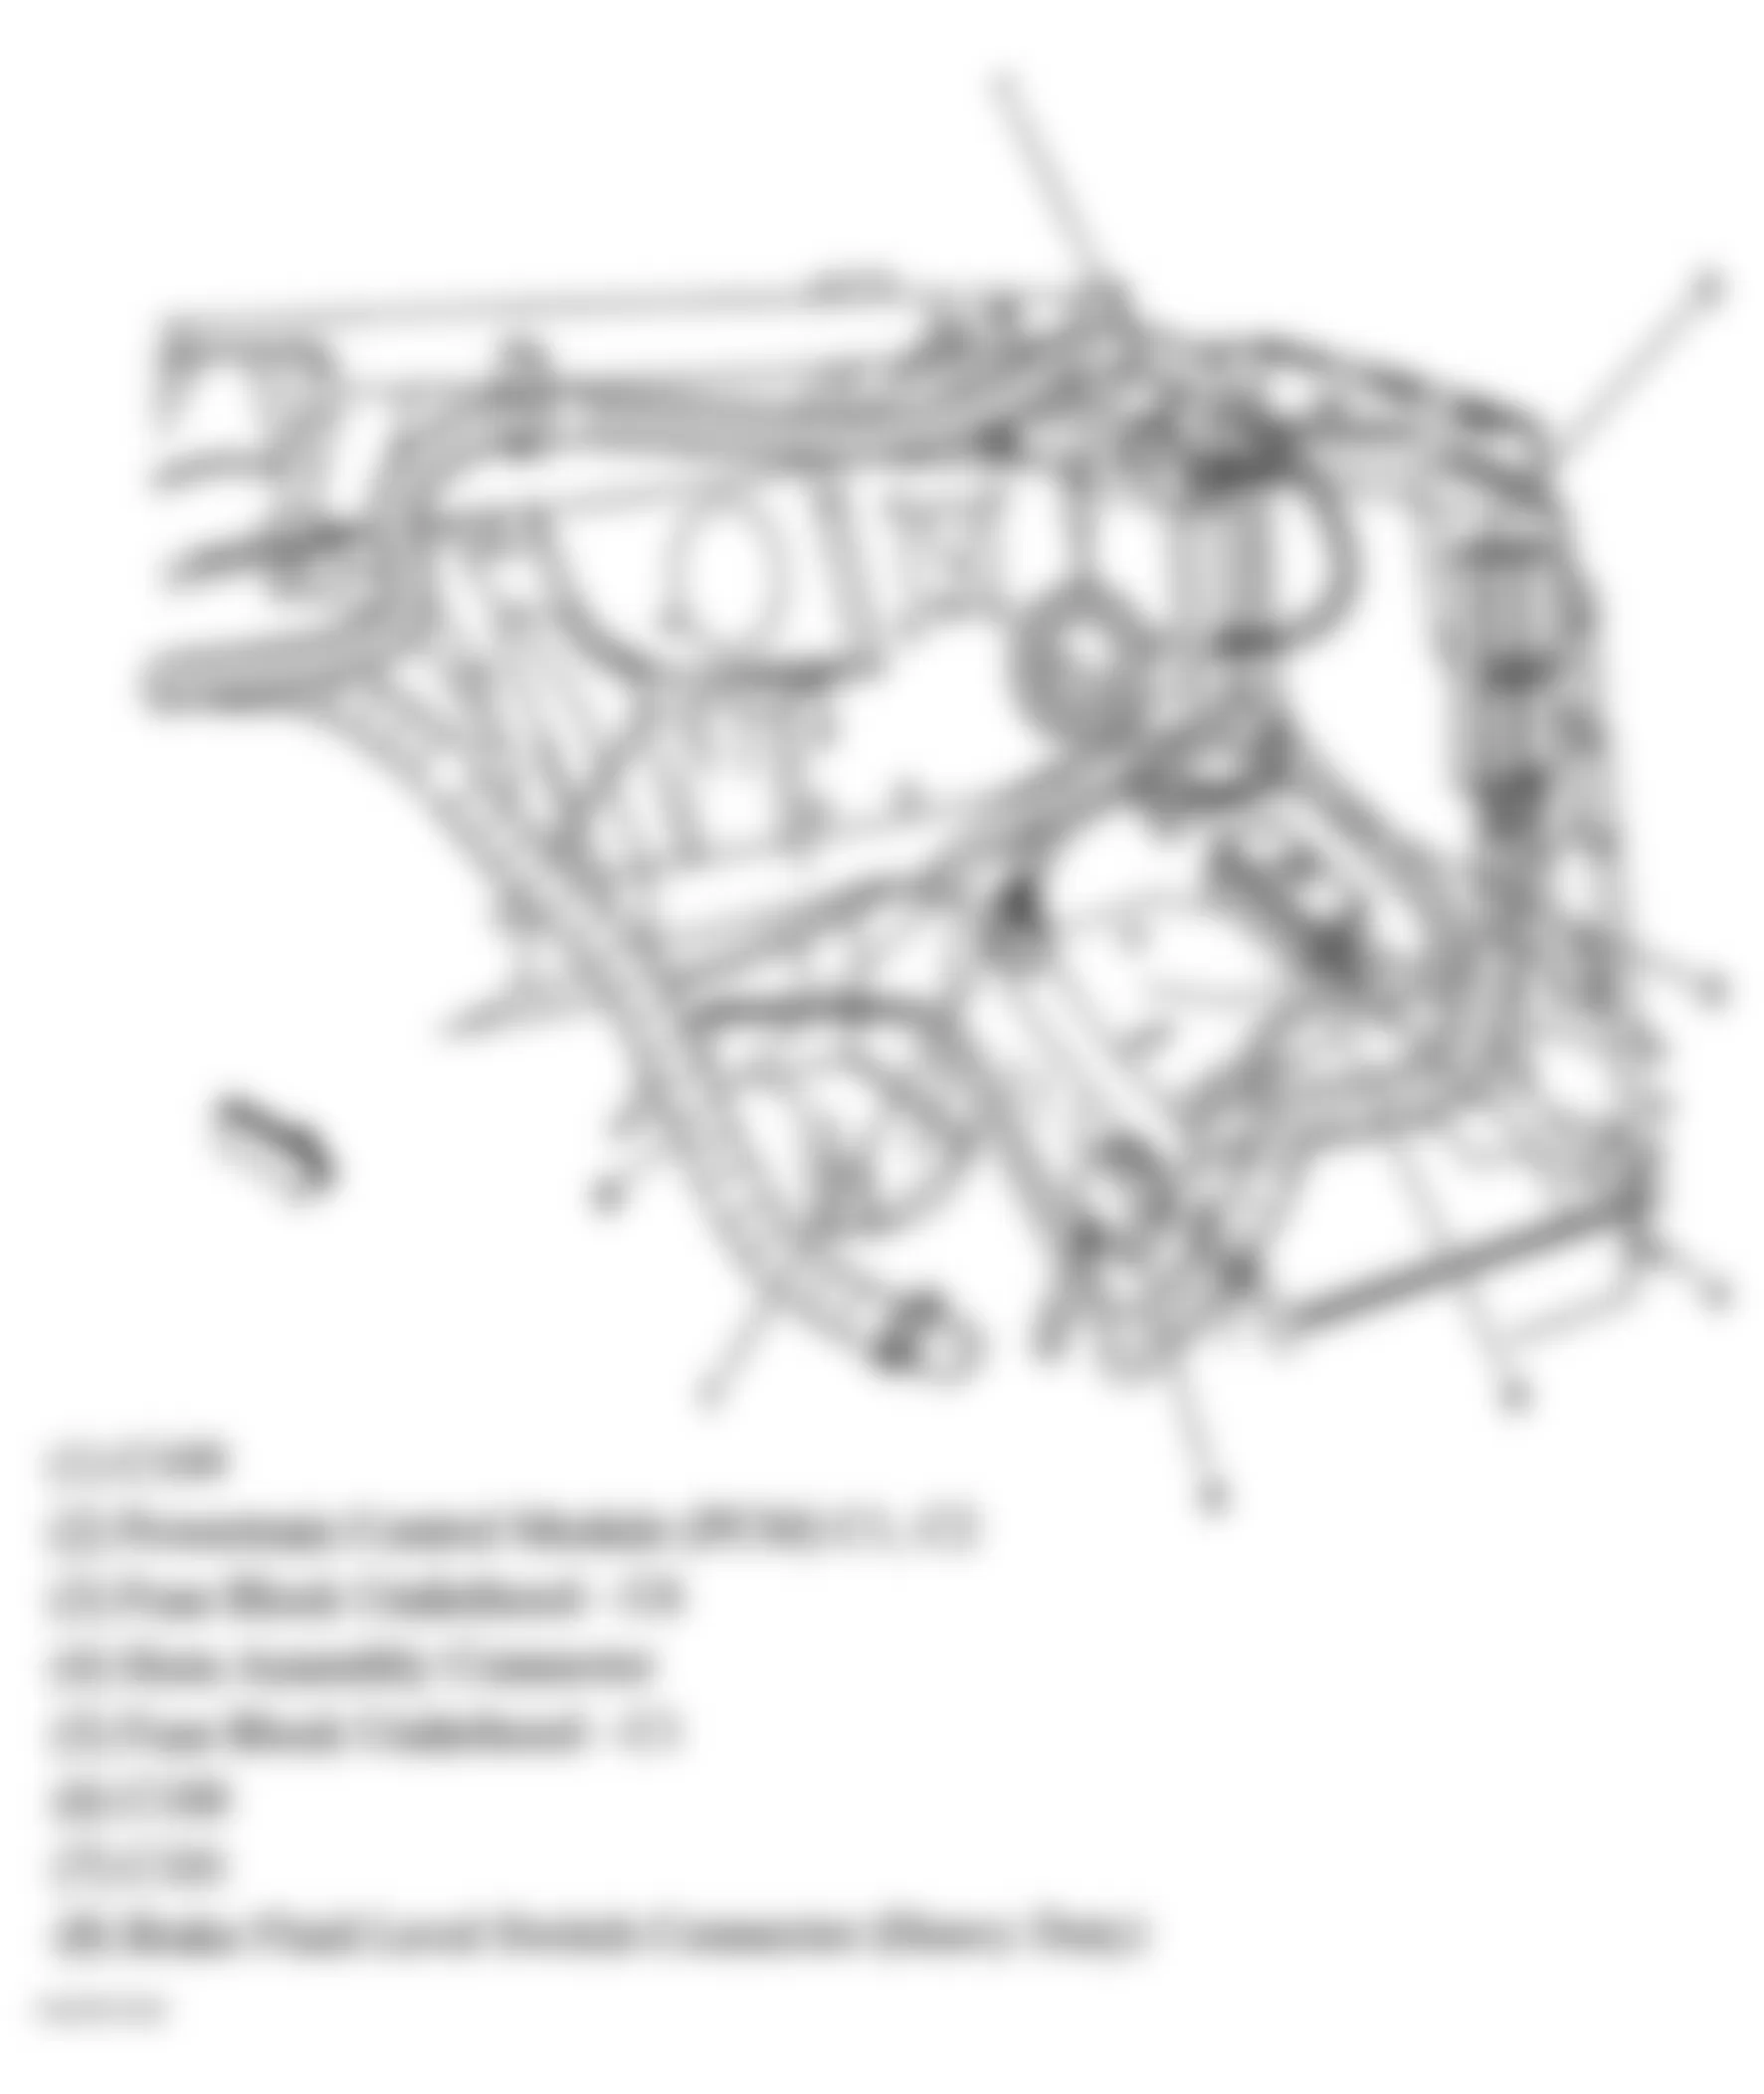 GMC Savana G3500 2007 - Component Locations -  Left Rear Of Engine Compartment